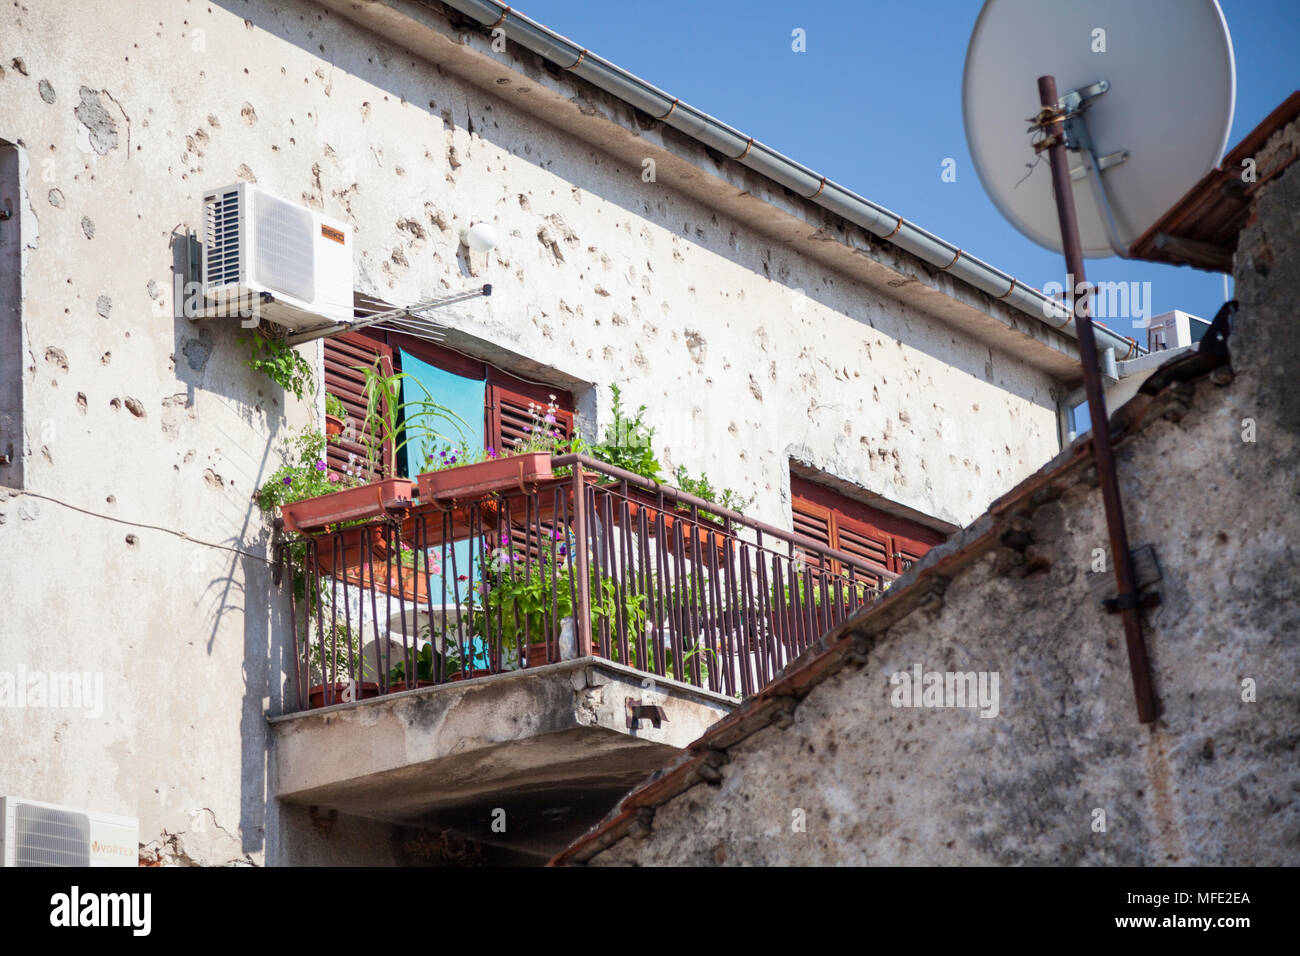 A balcony surrounded by bullet damaged walls in Mostar, Bosnia and Herzegovina Stock Photo